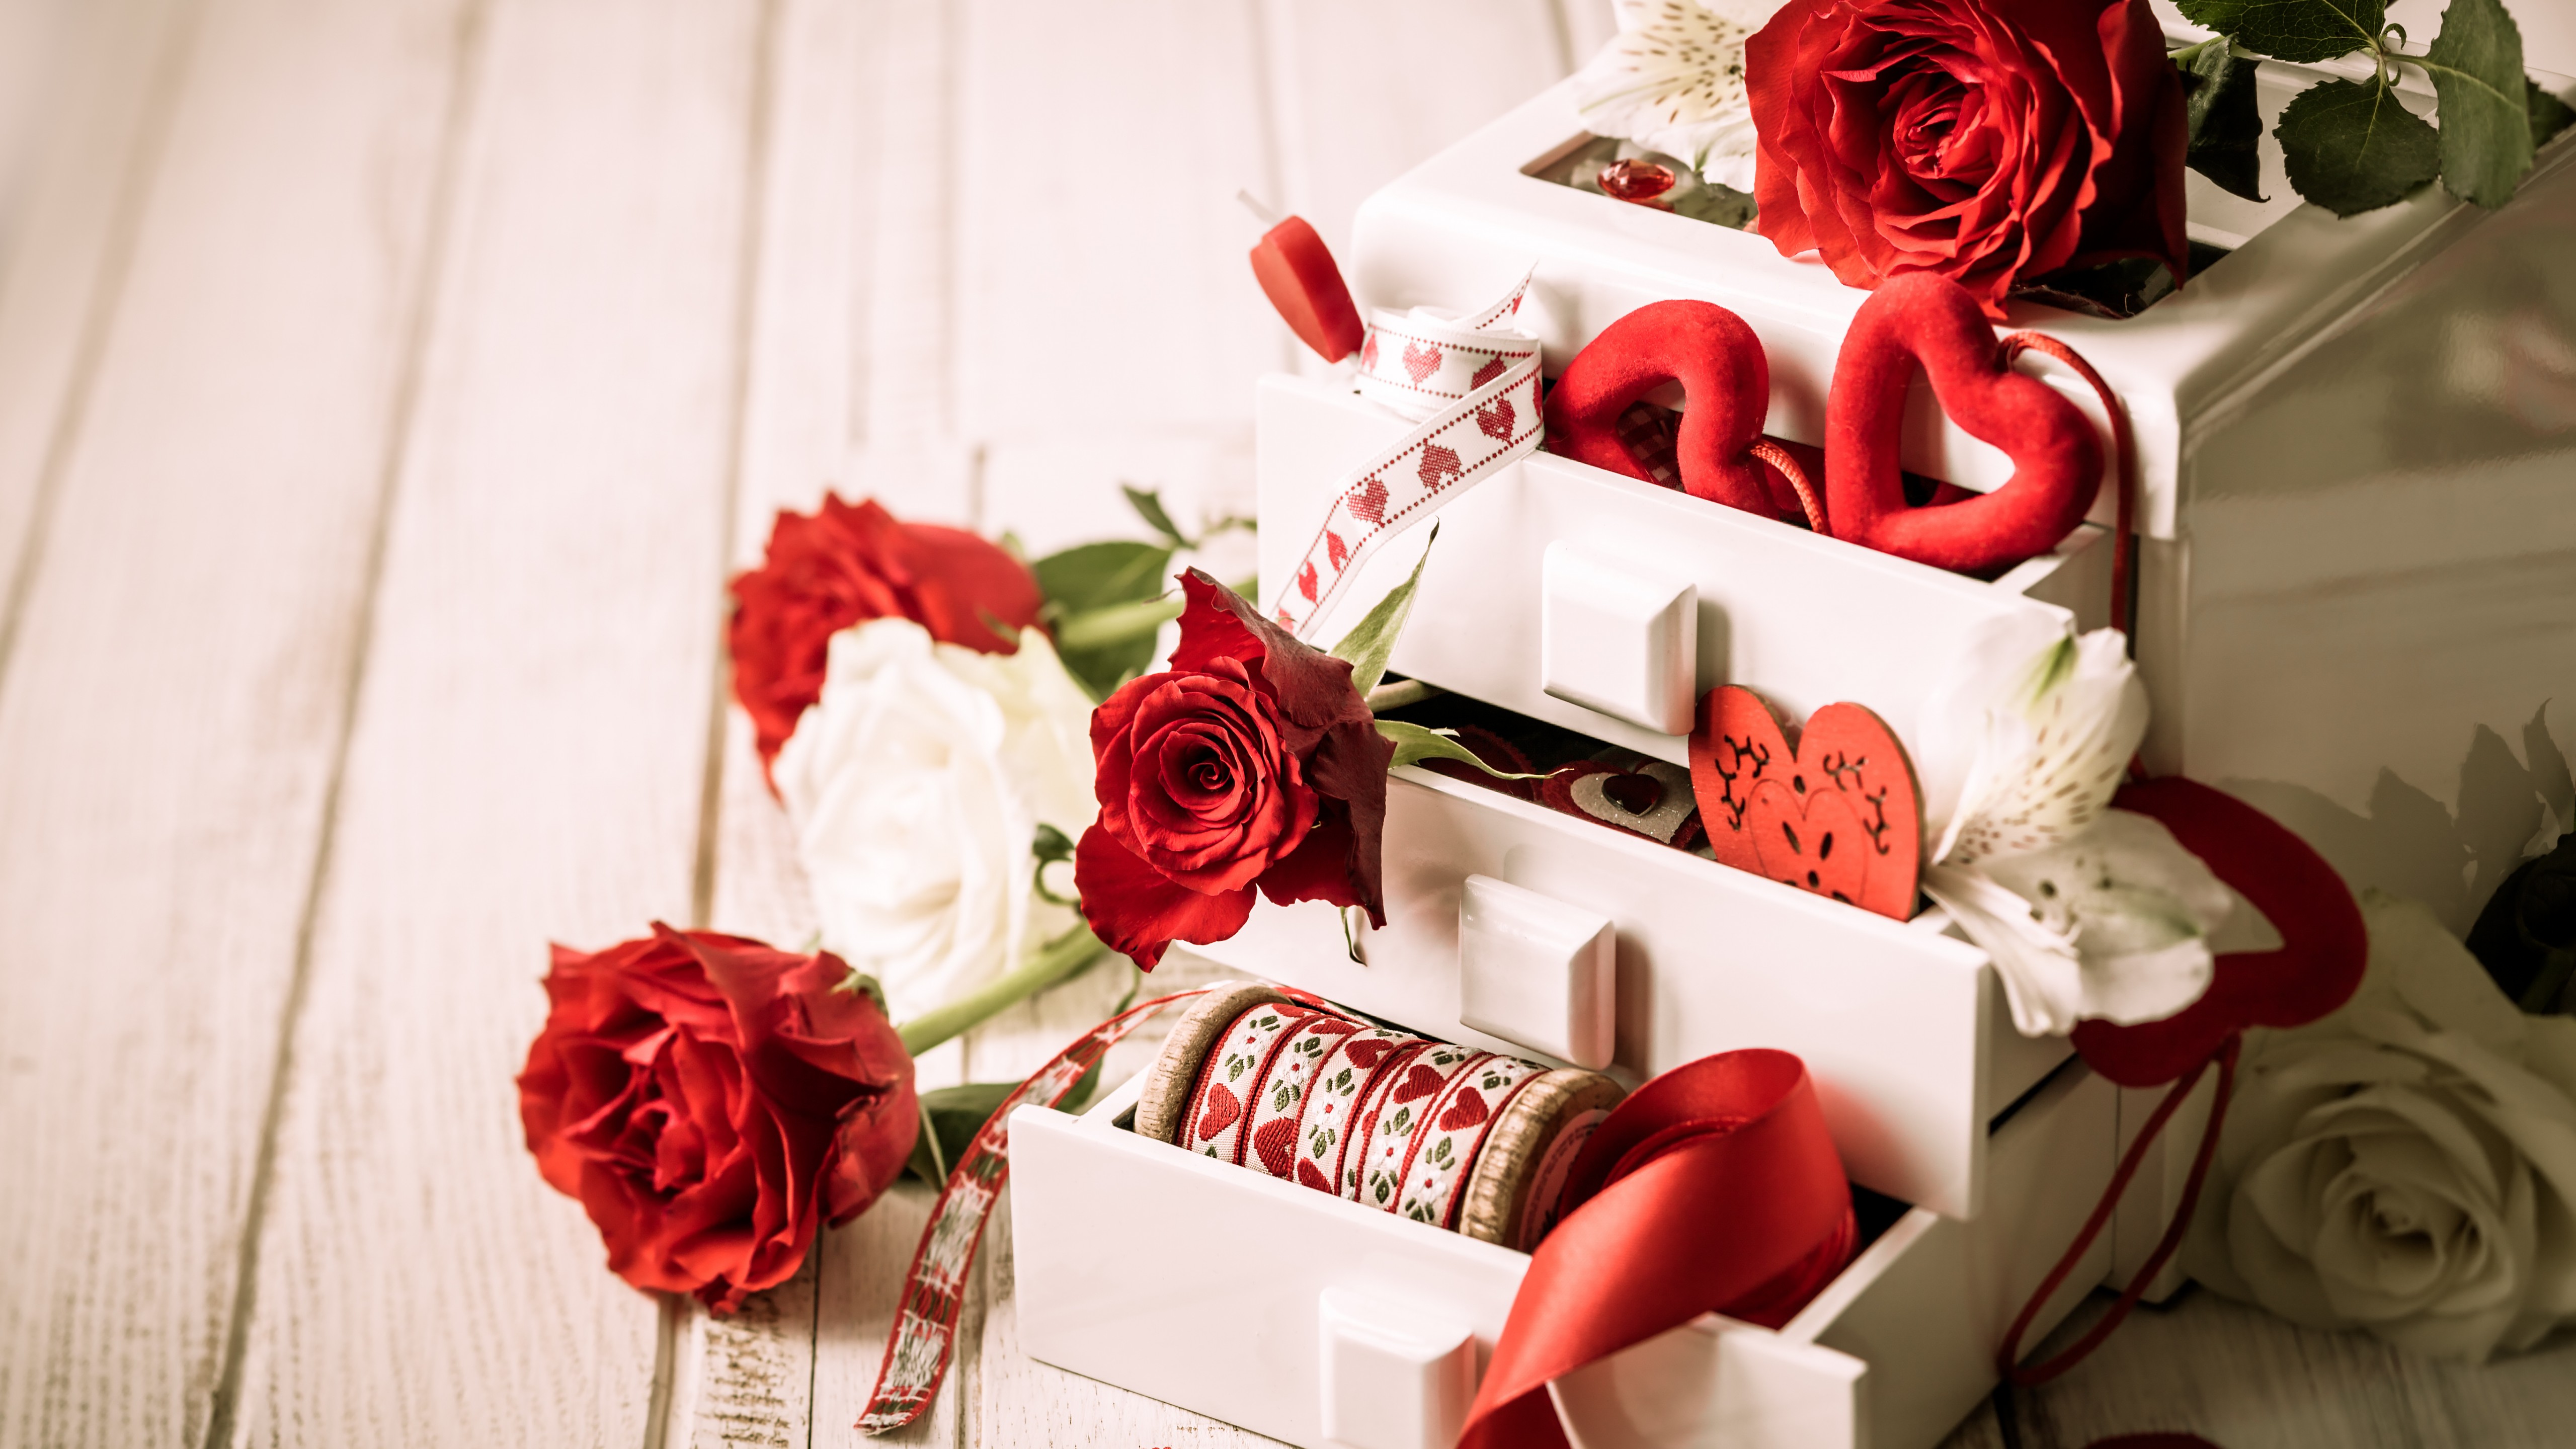 Wallpaper Valentine's Day, rose, heart, ribbon, romantic, love, Holidays  #8491 - Page 14